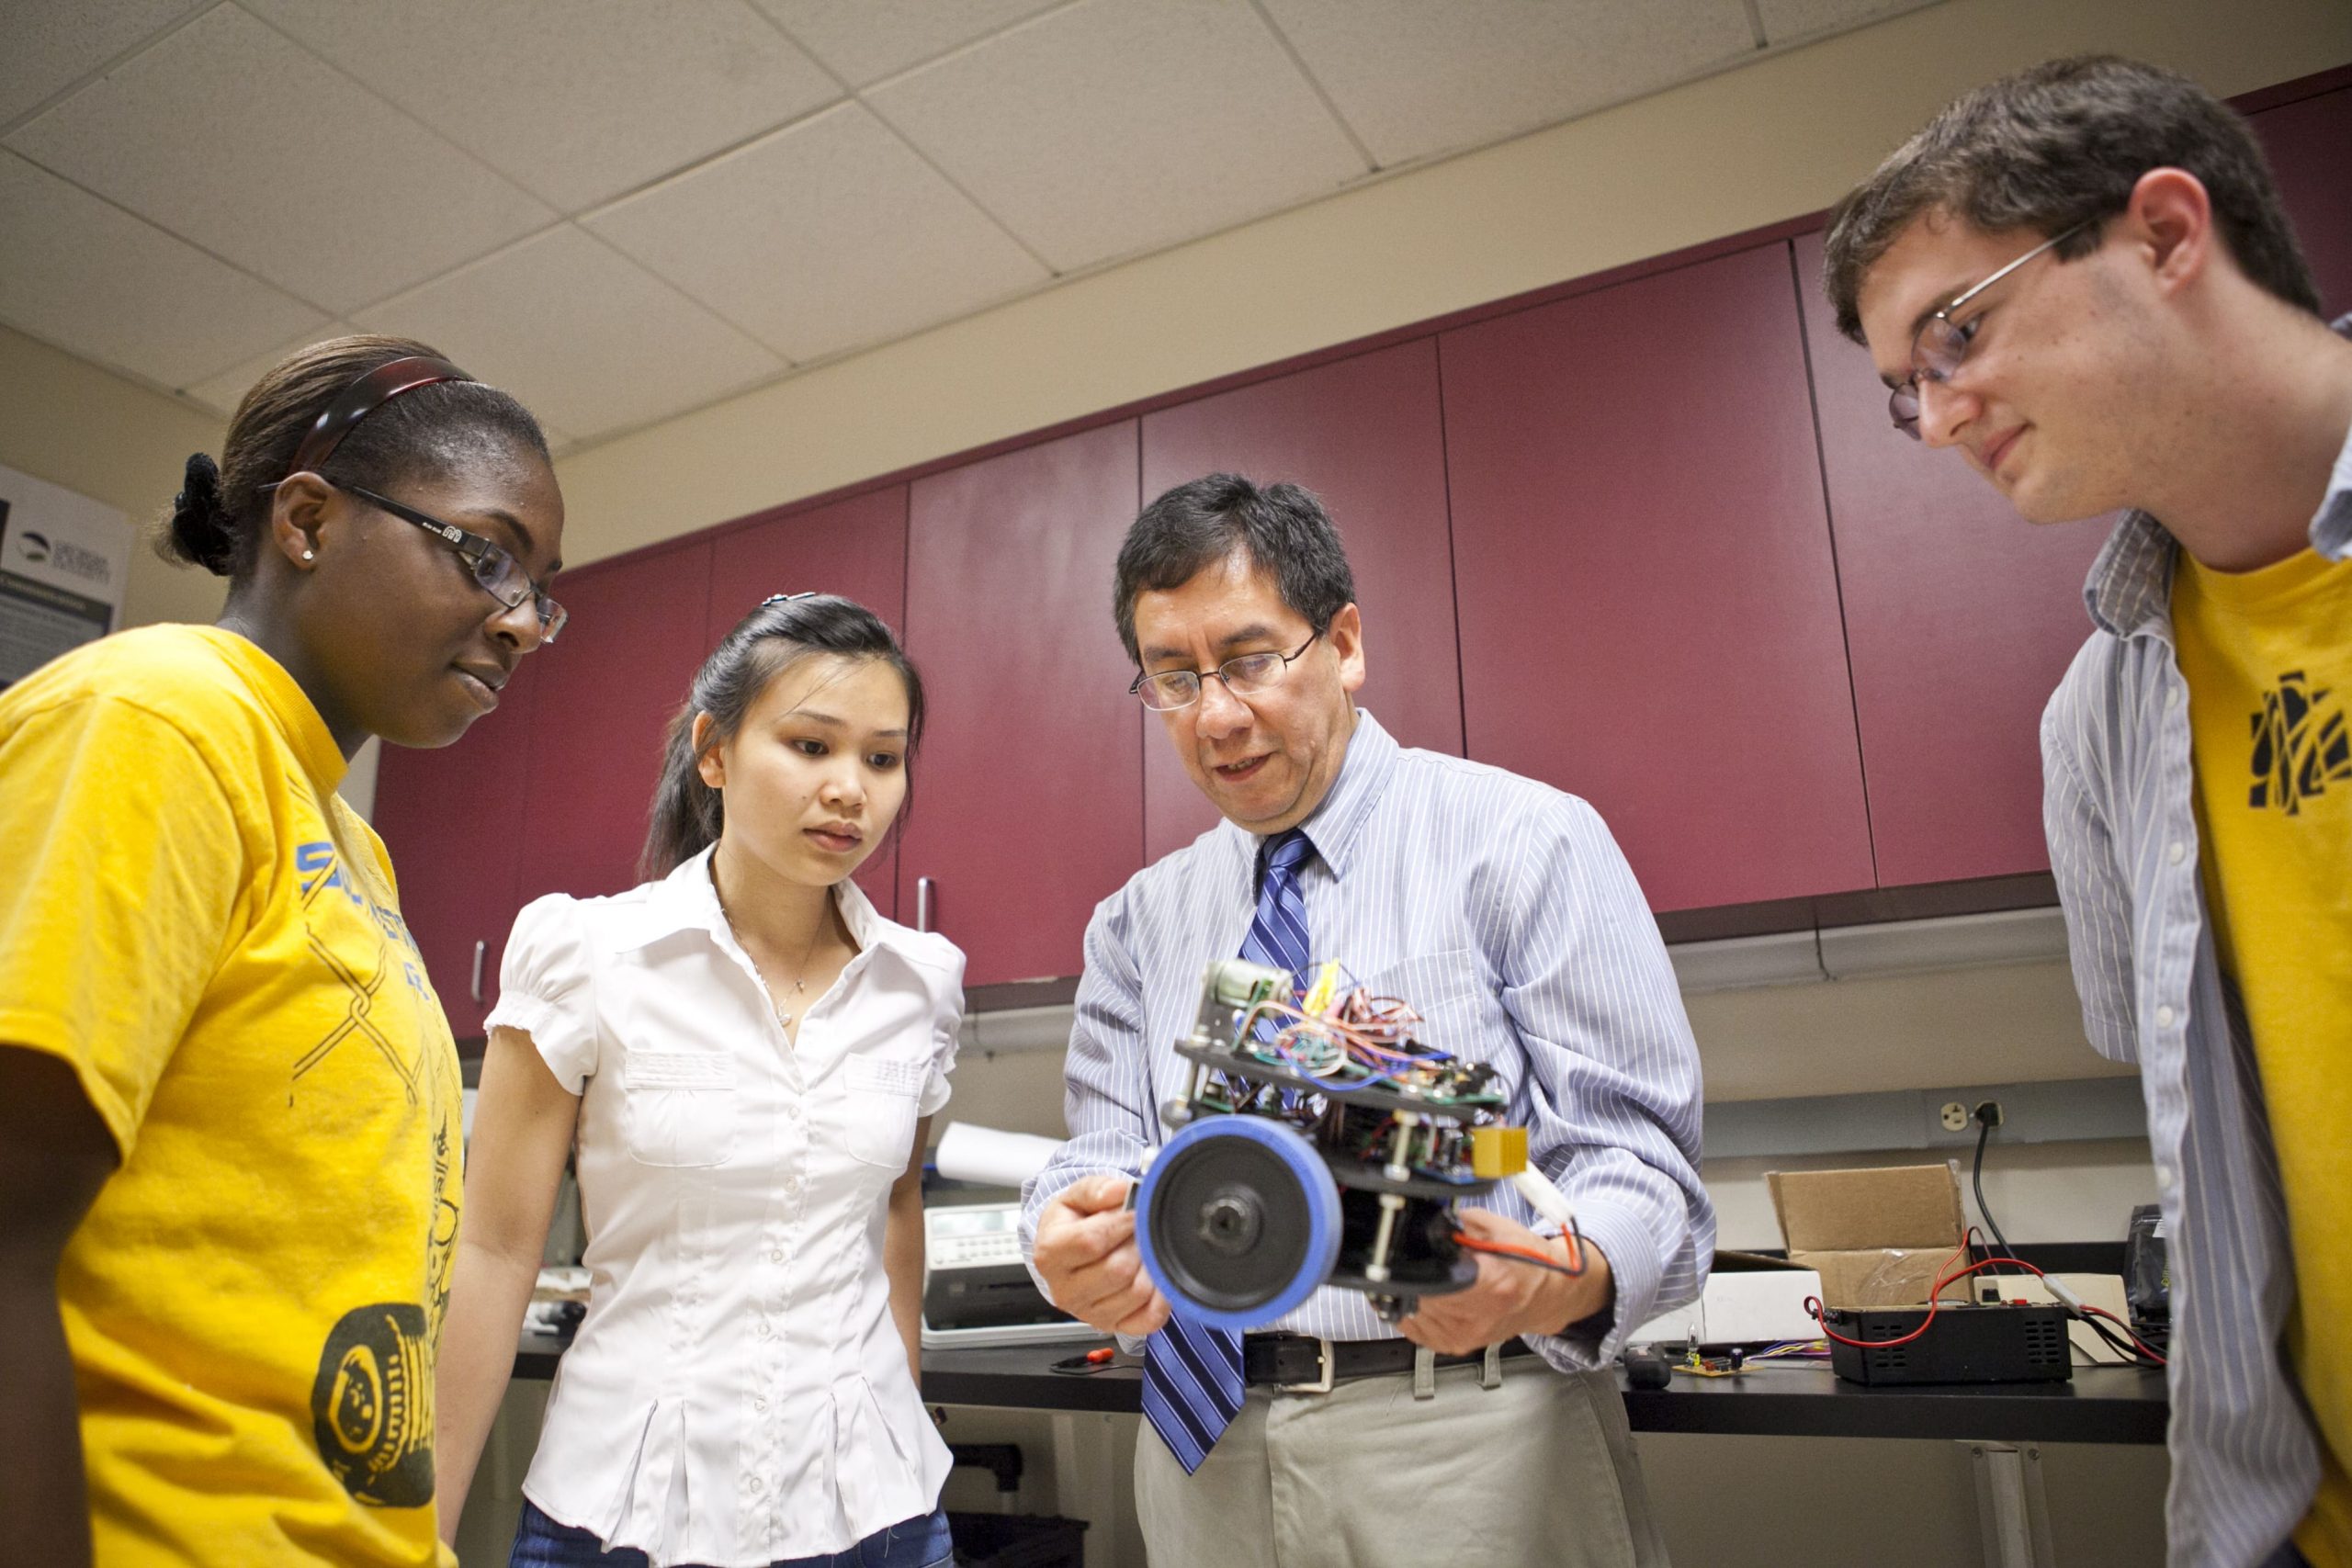 Innovation Students learning from faculty about new technology